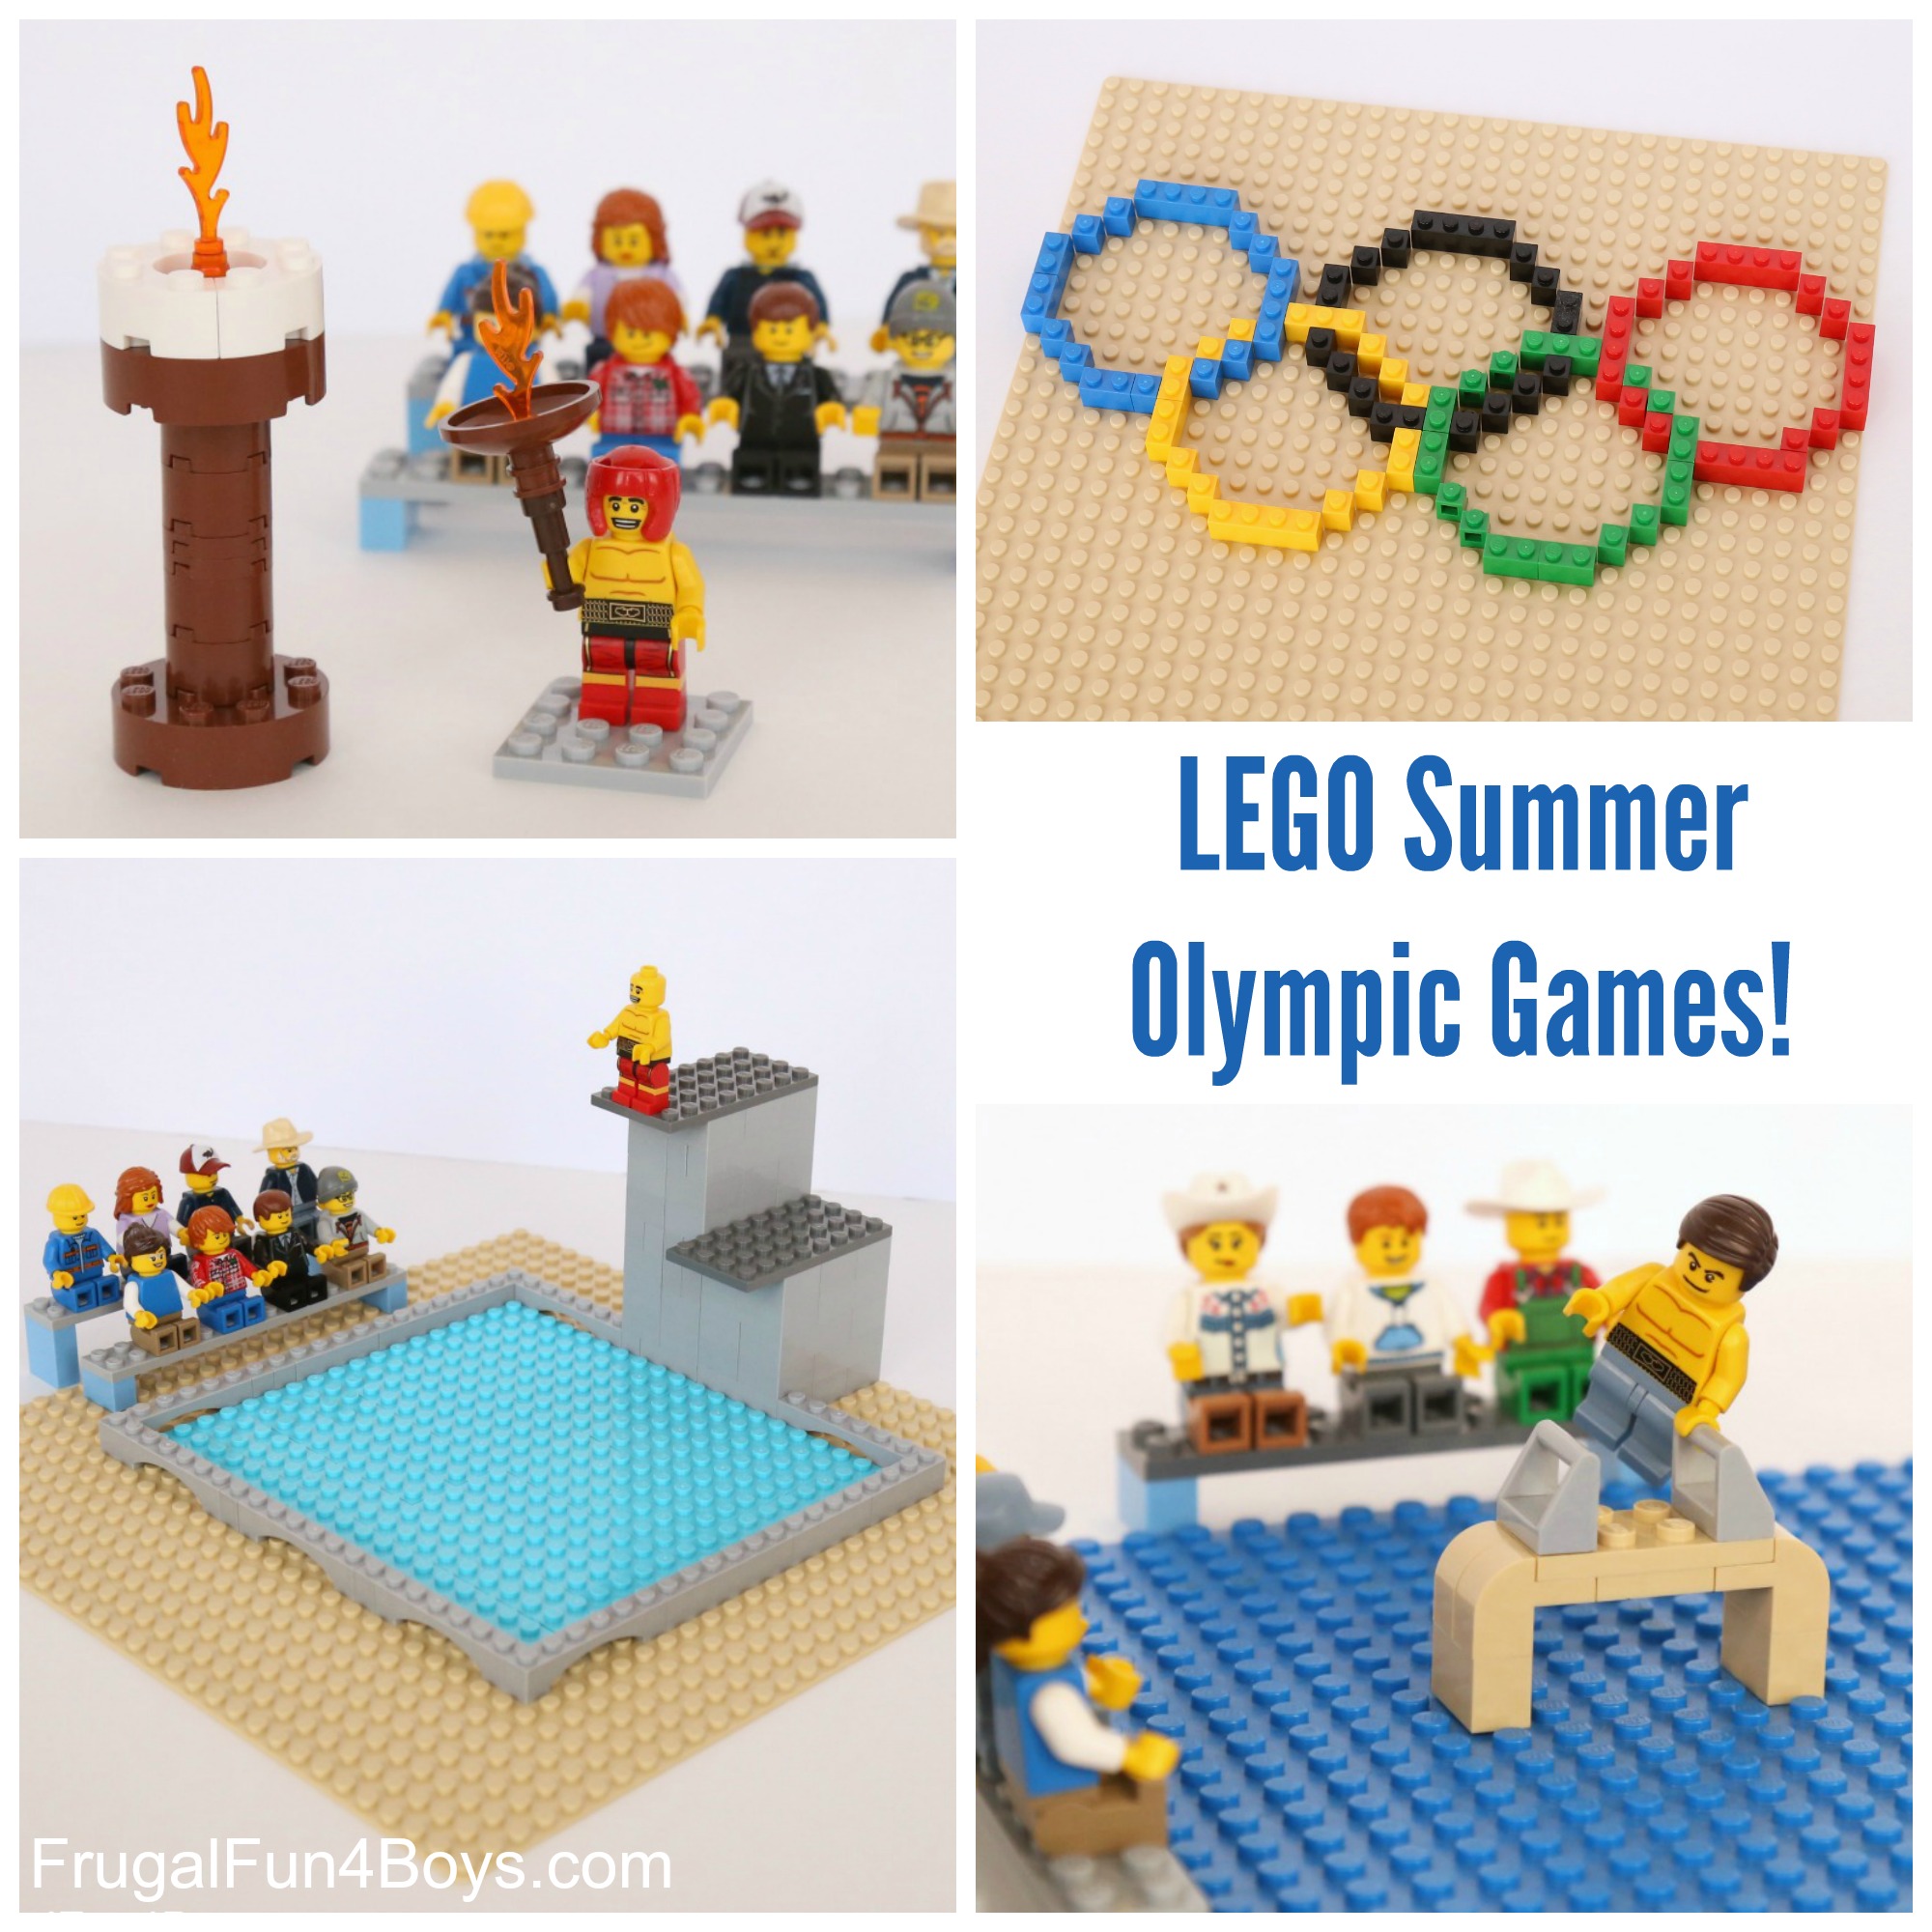 Build the LEGO Summer Olympic Games!